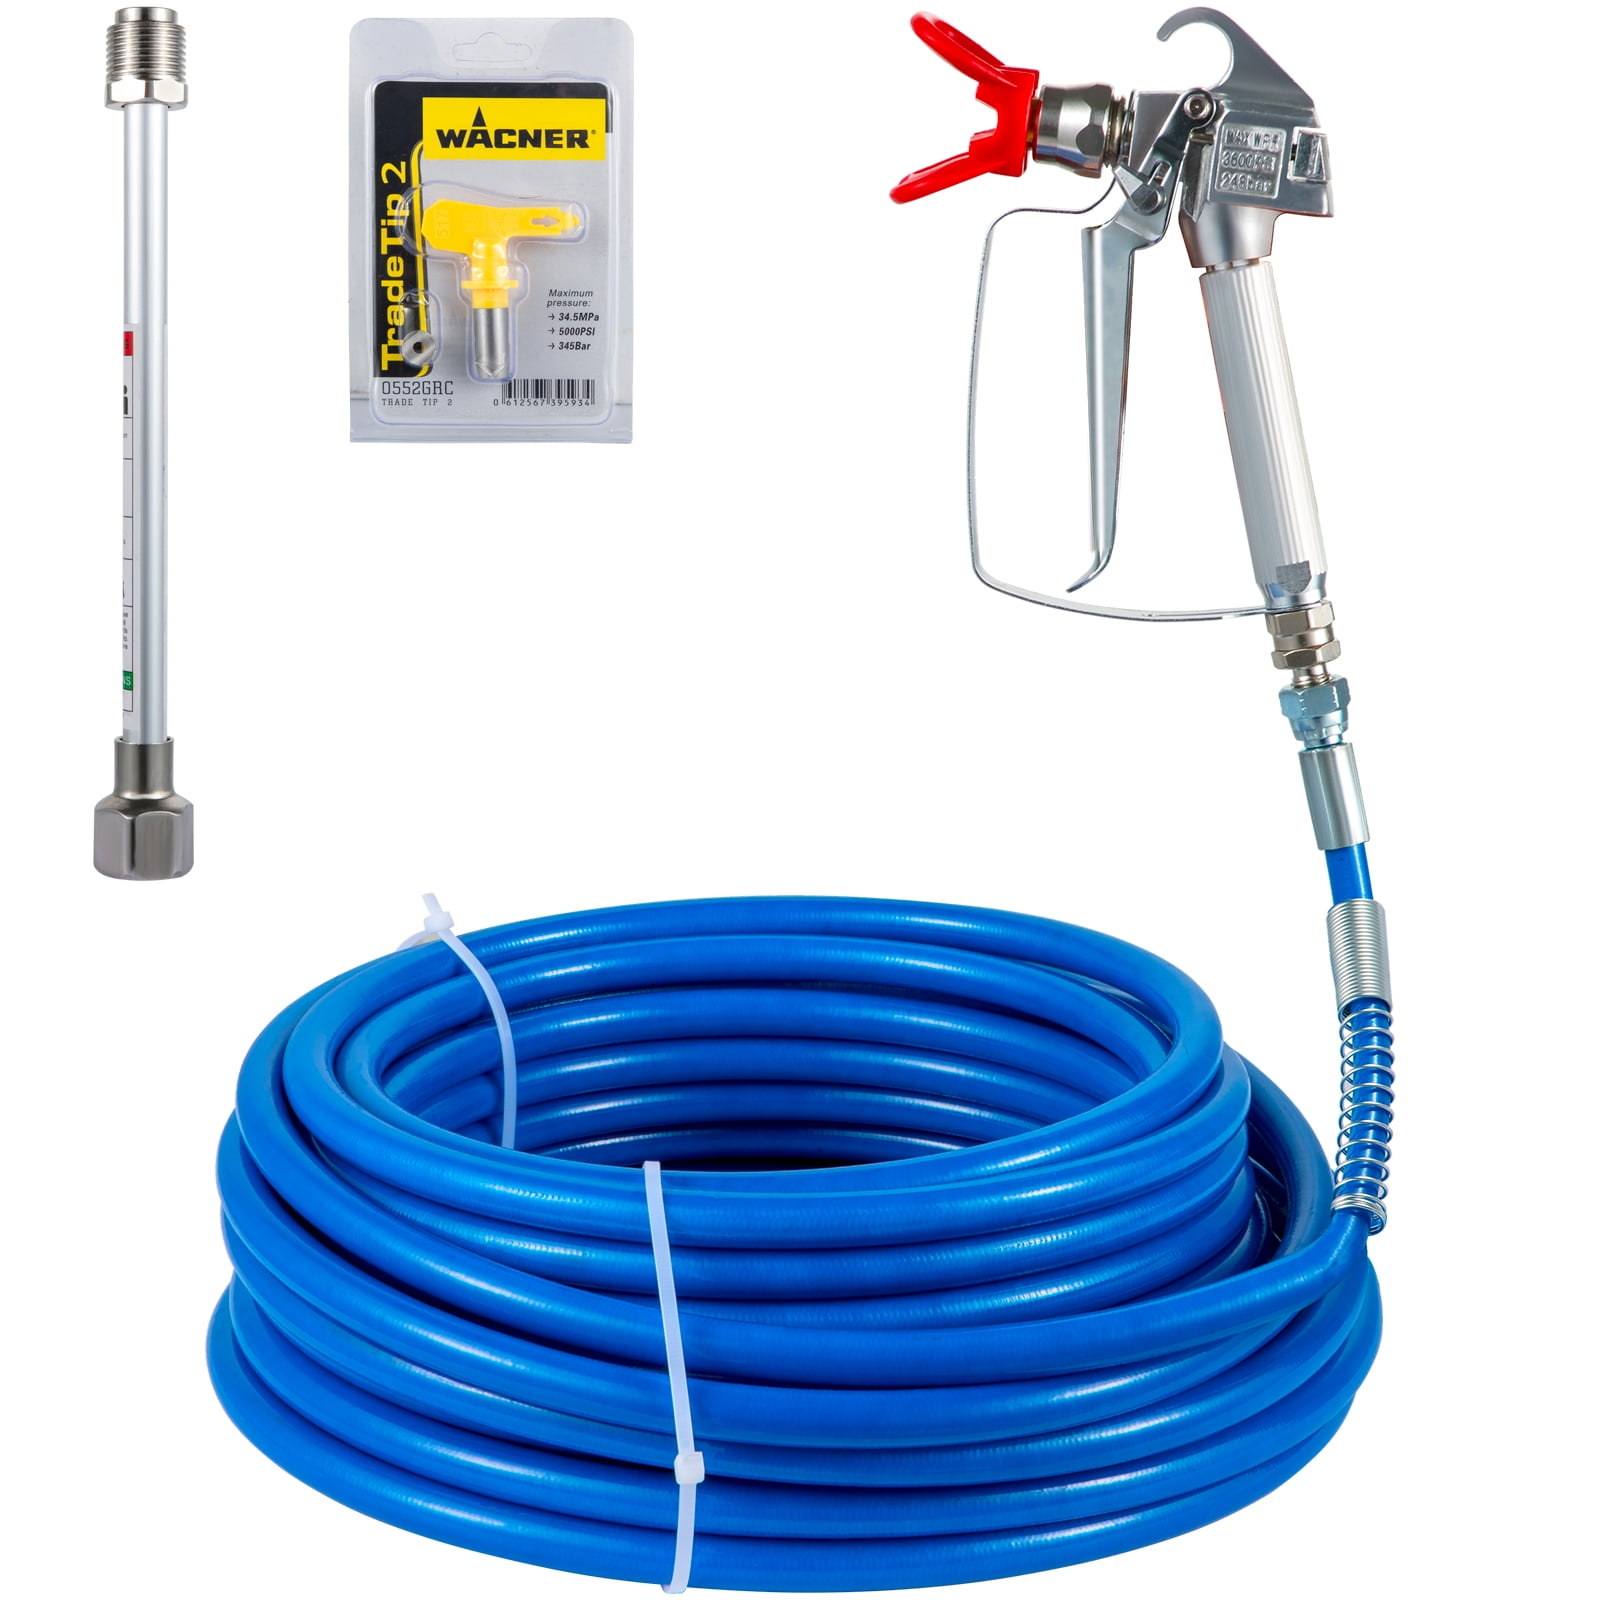 Need New Paint Sprayer Hose for Graco. 10 Must-Know Tips for Durability and Performance